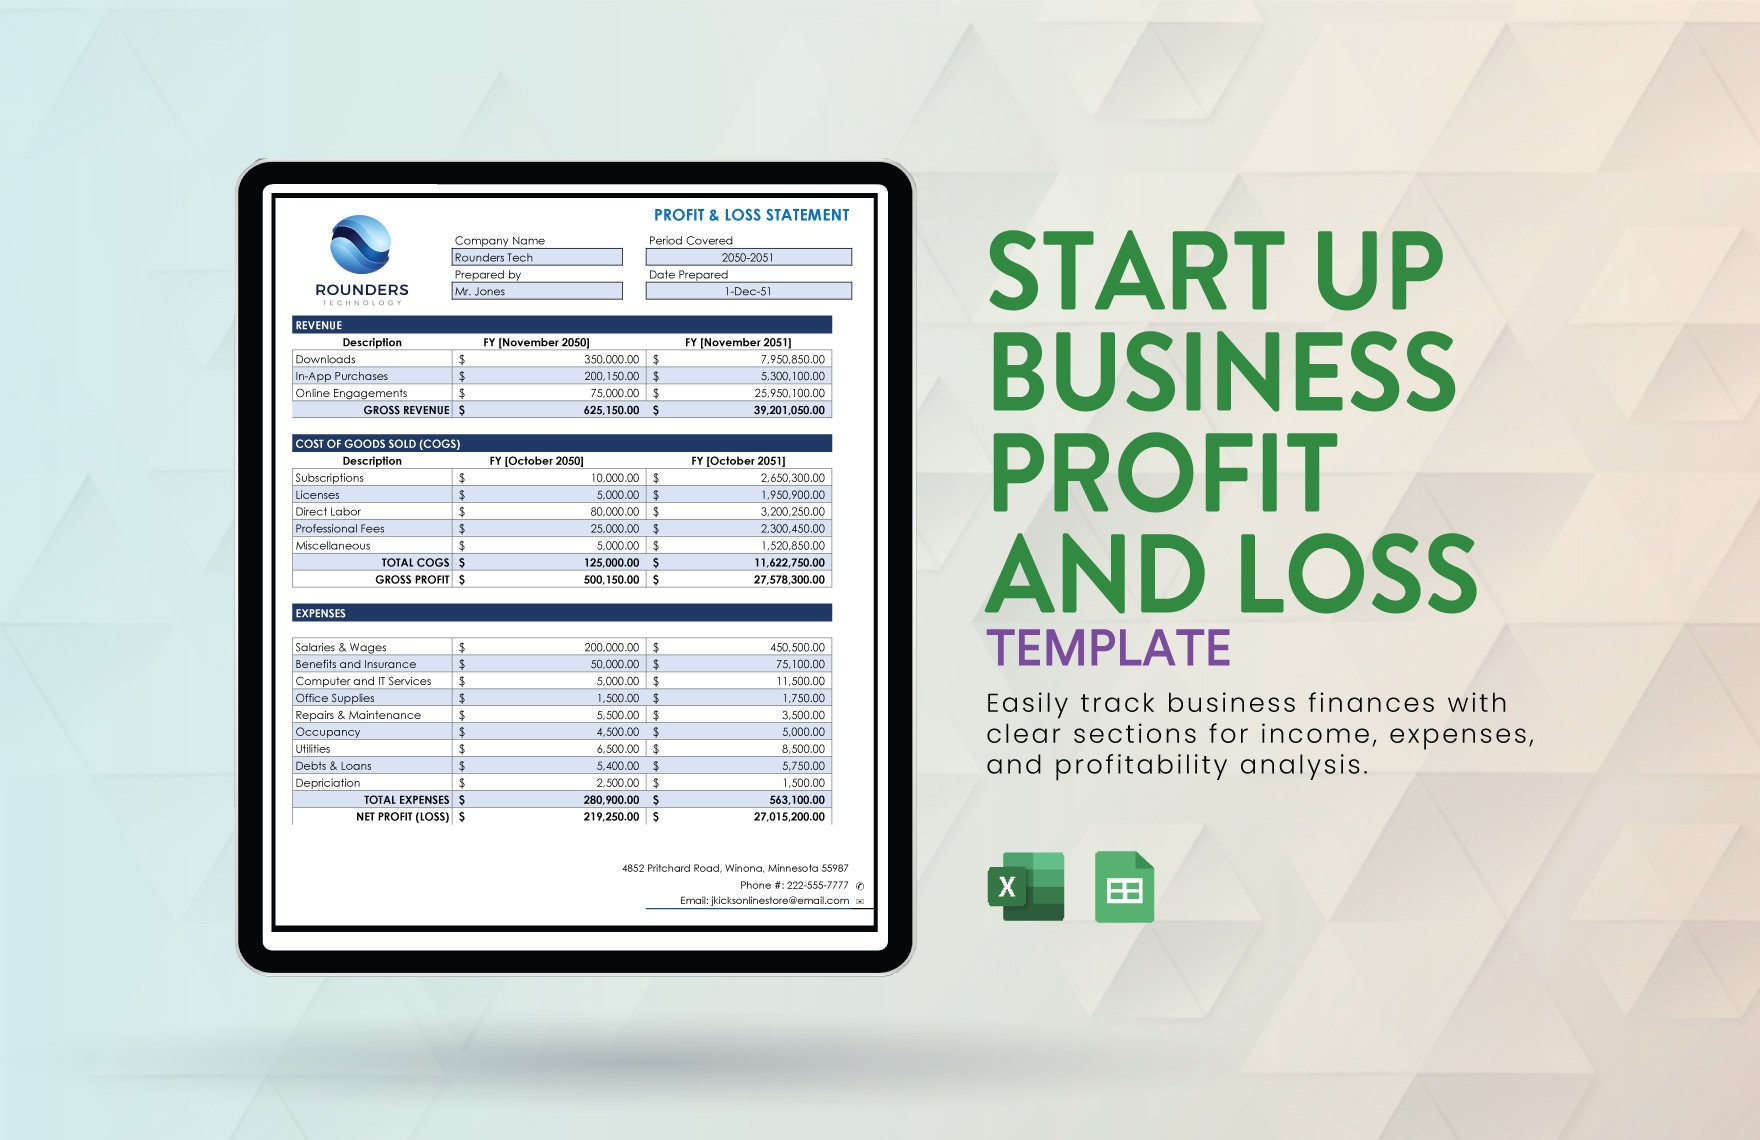 Start Up Business Profit And Loss Template